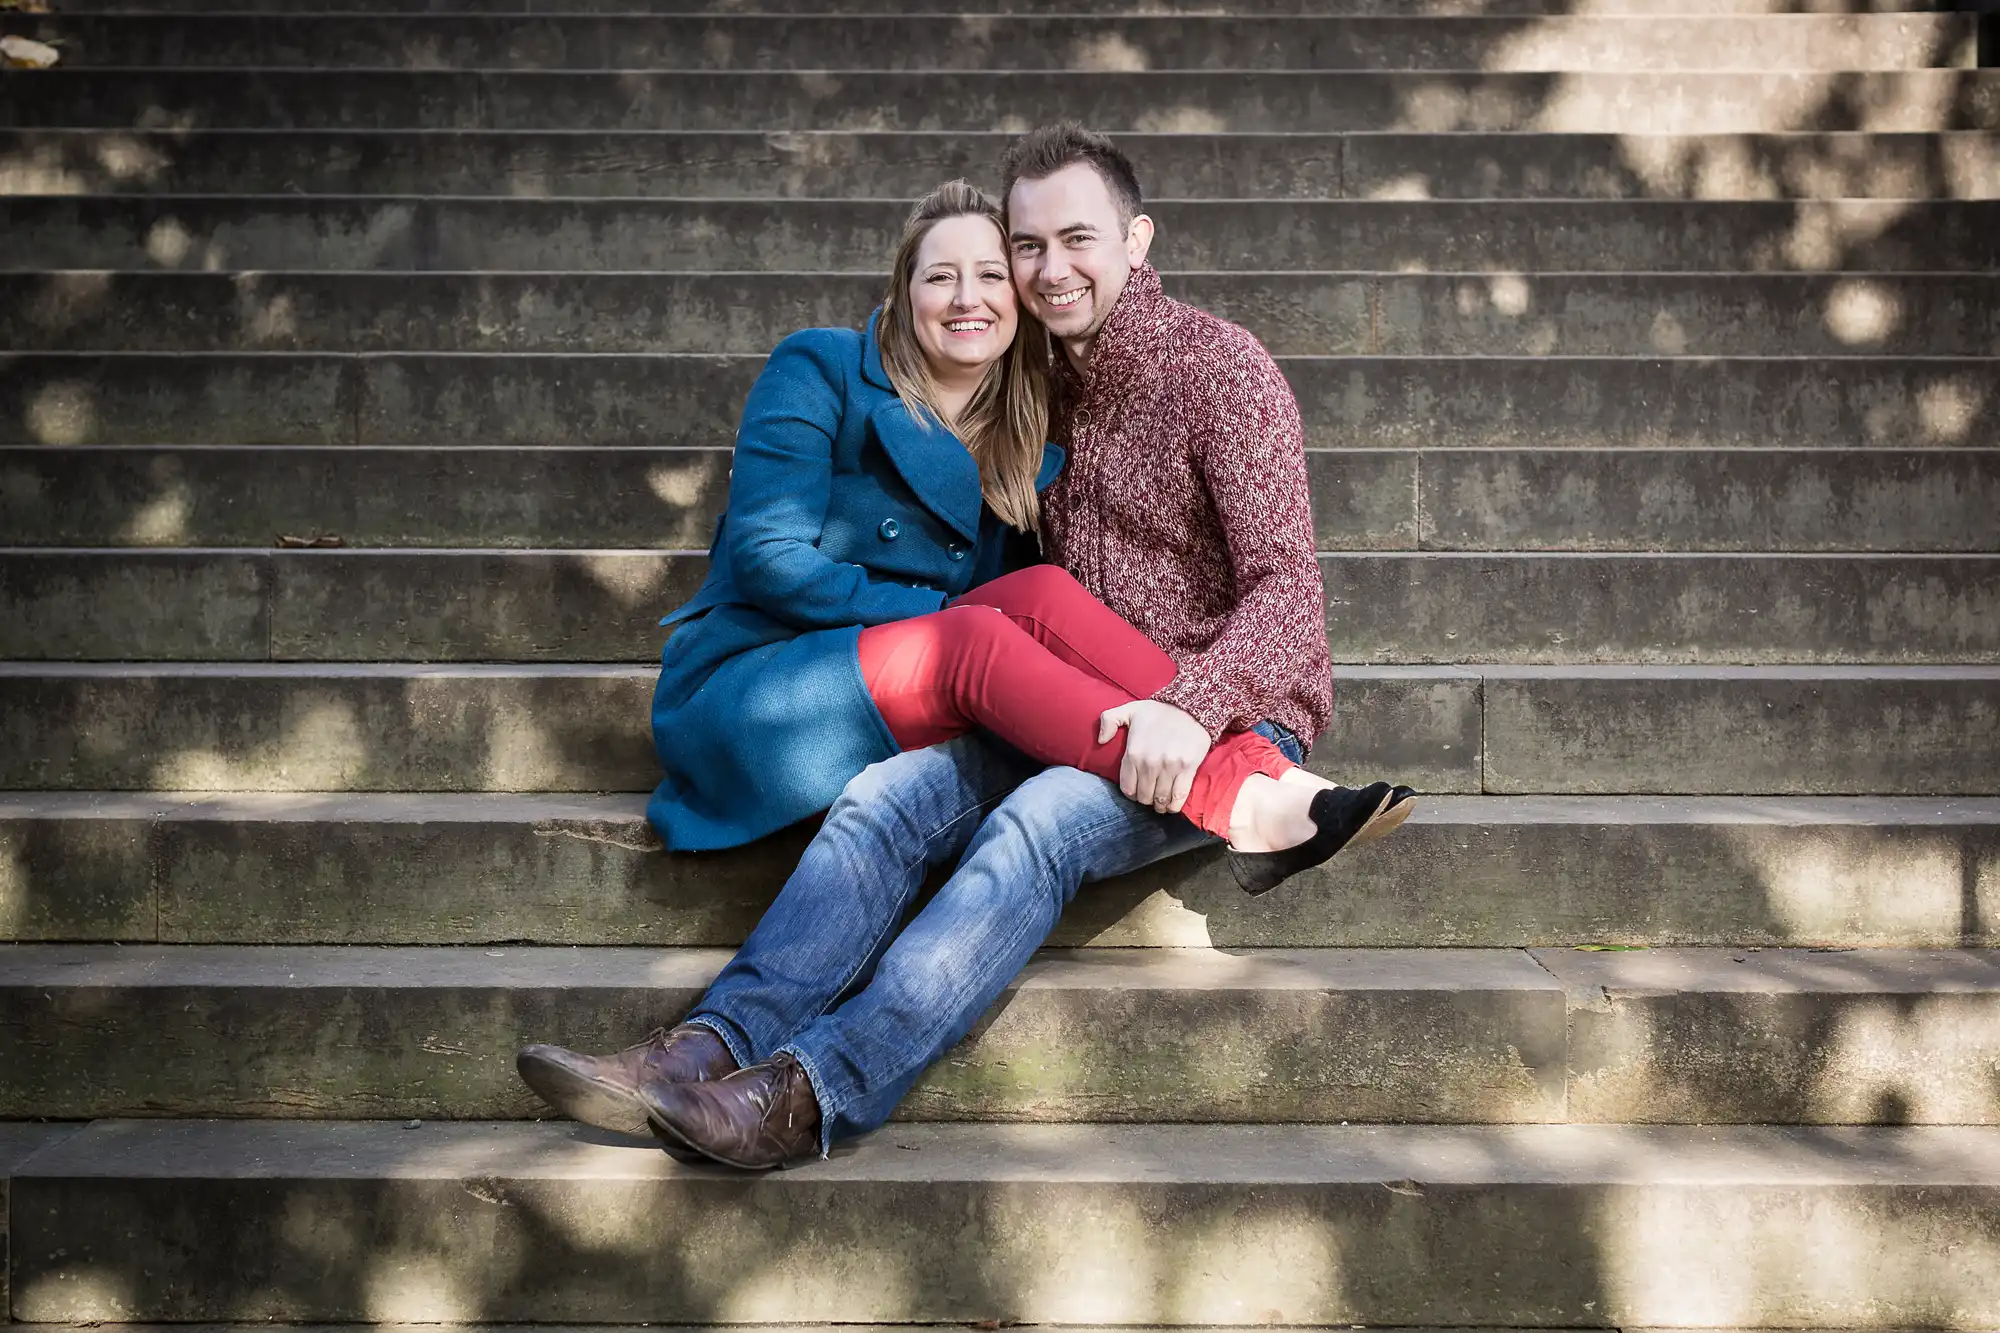 A happy couple sitting closely on stone steps, smiling at the camera, with the woman wearing a blue coat and the man in a red shirt and jeans.